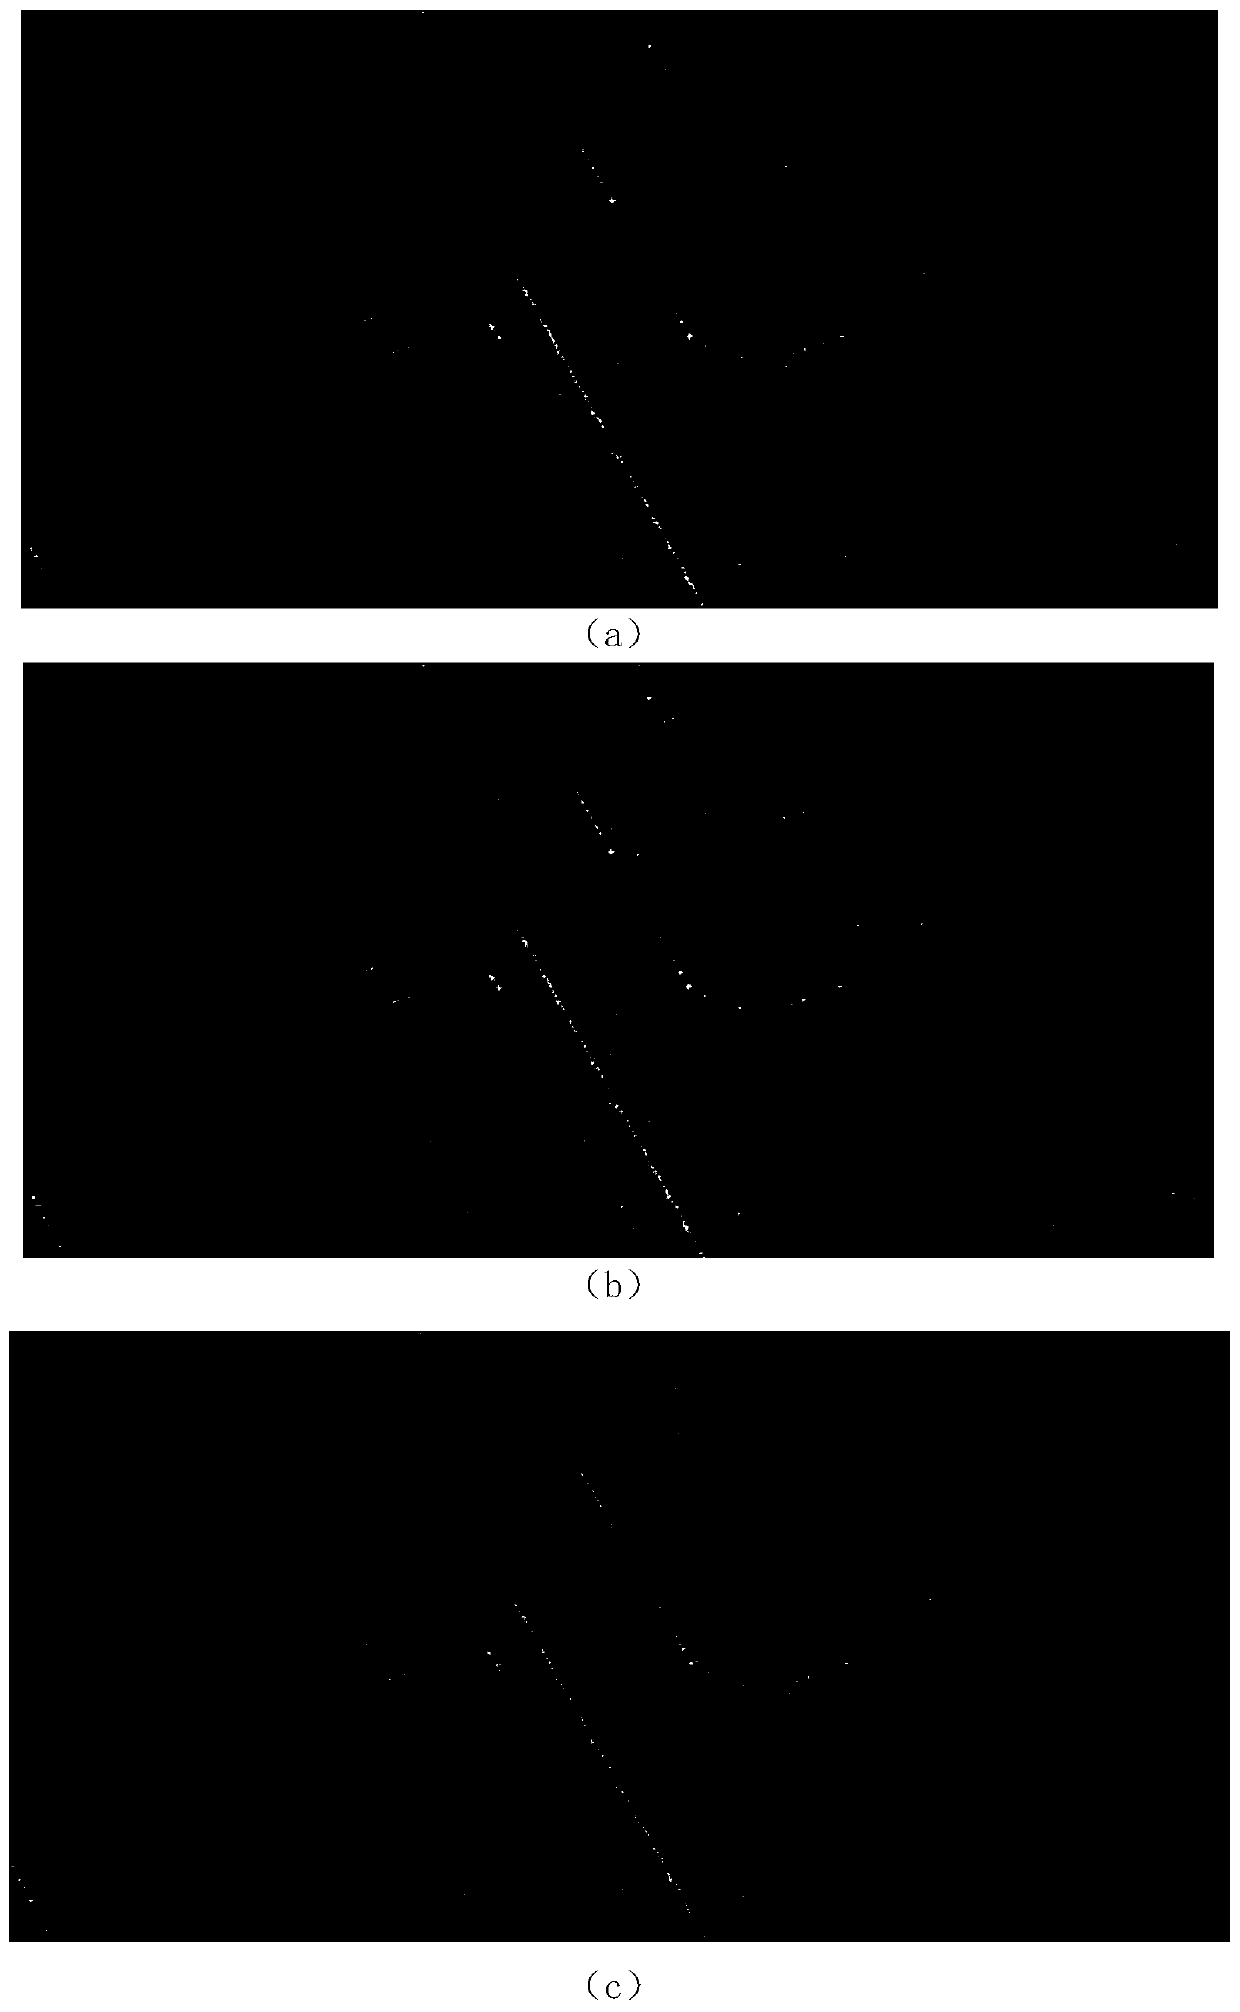 SAR Image Sidelobe Suppression Method Based on Nonlinear Polynomial Filtering